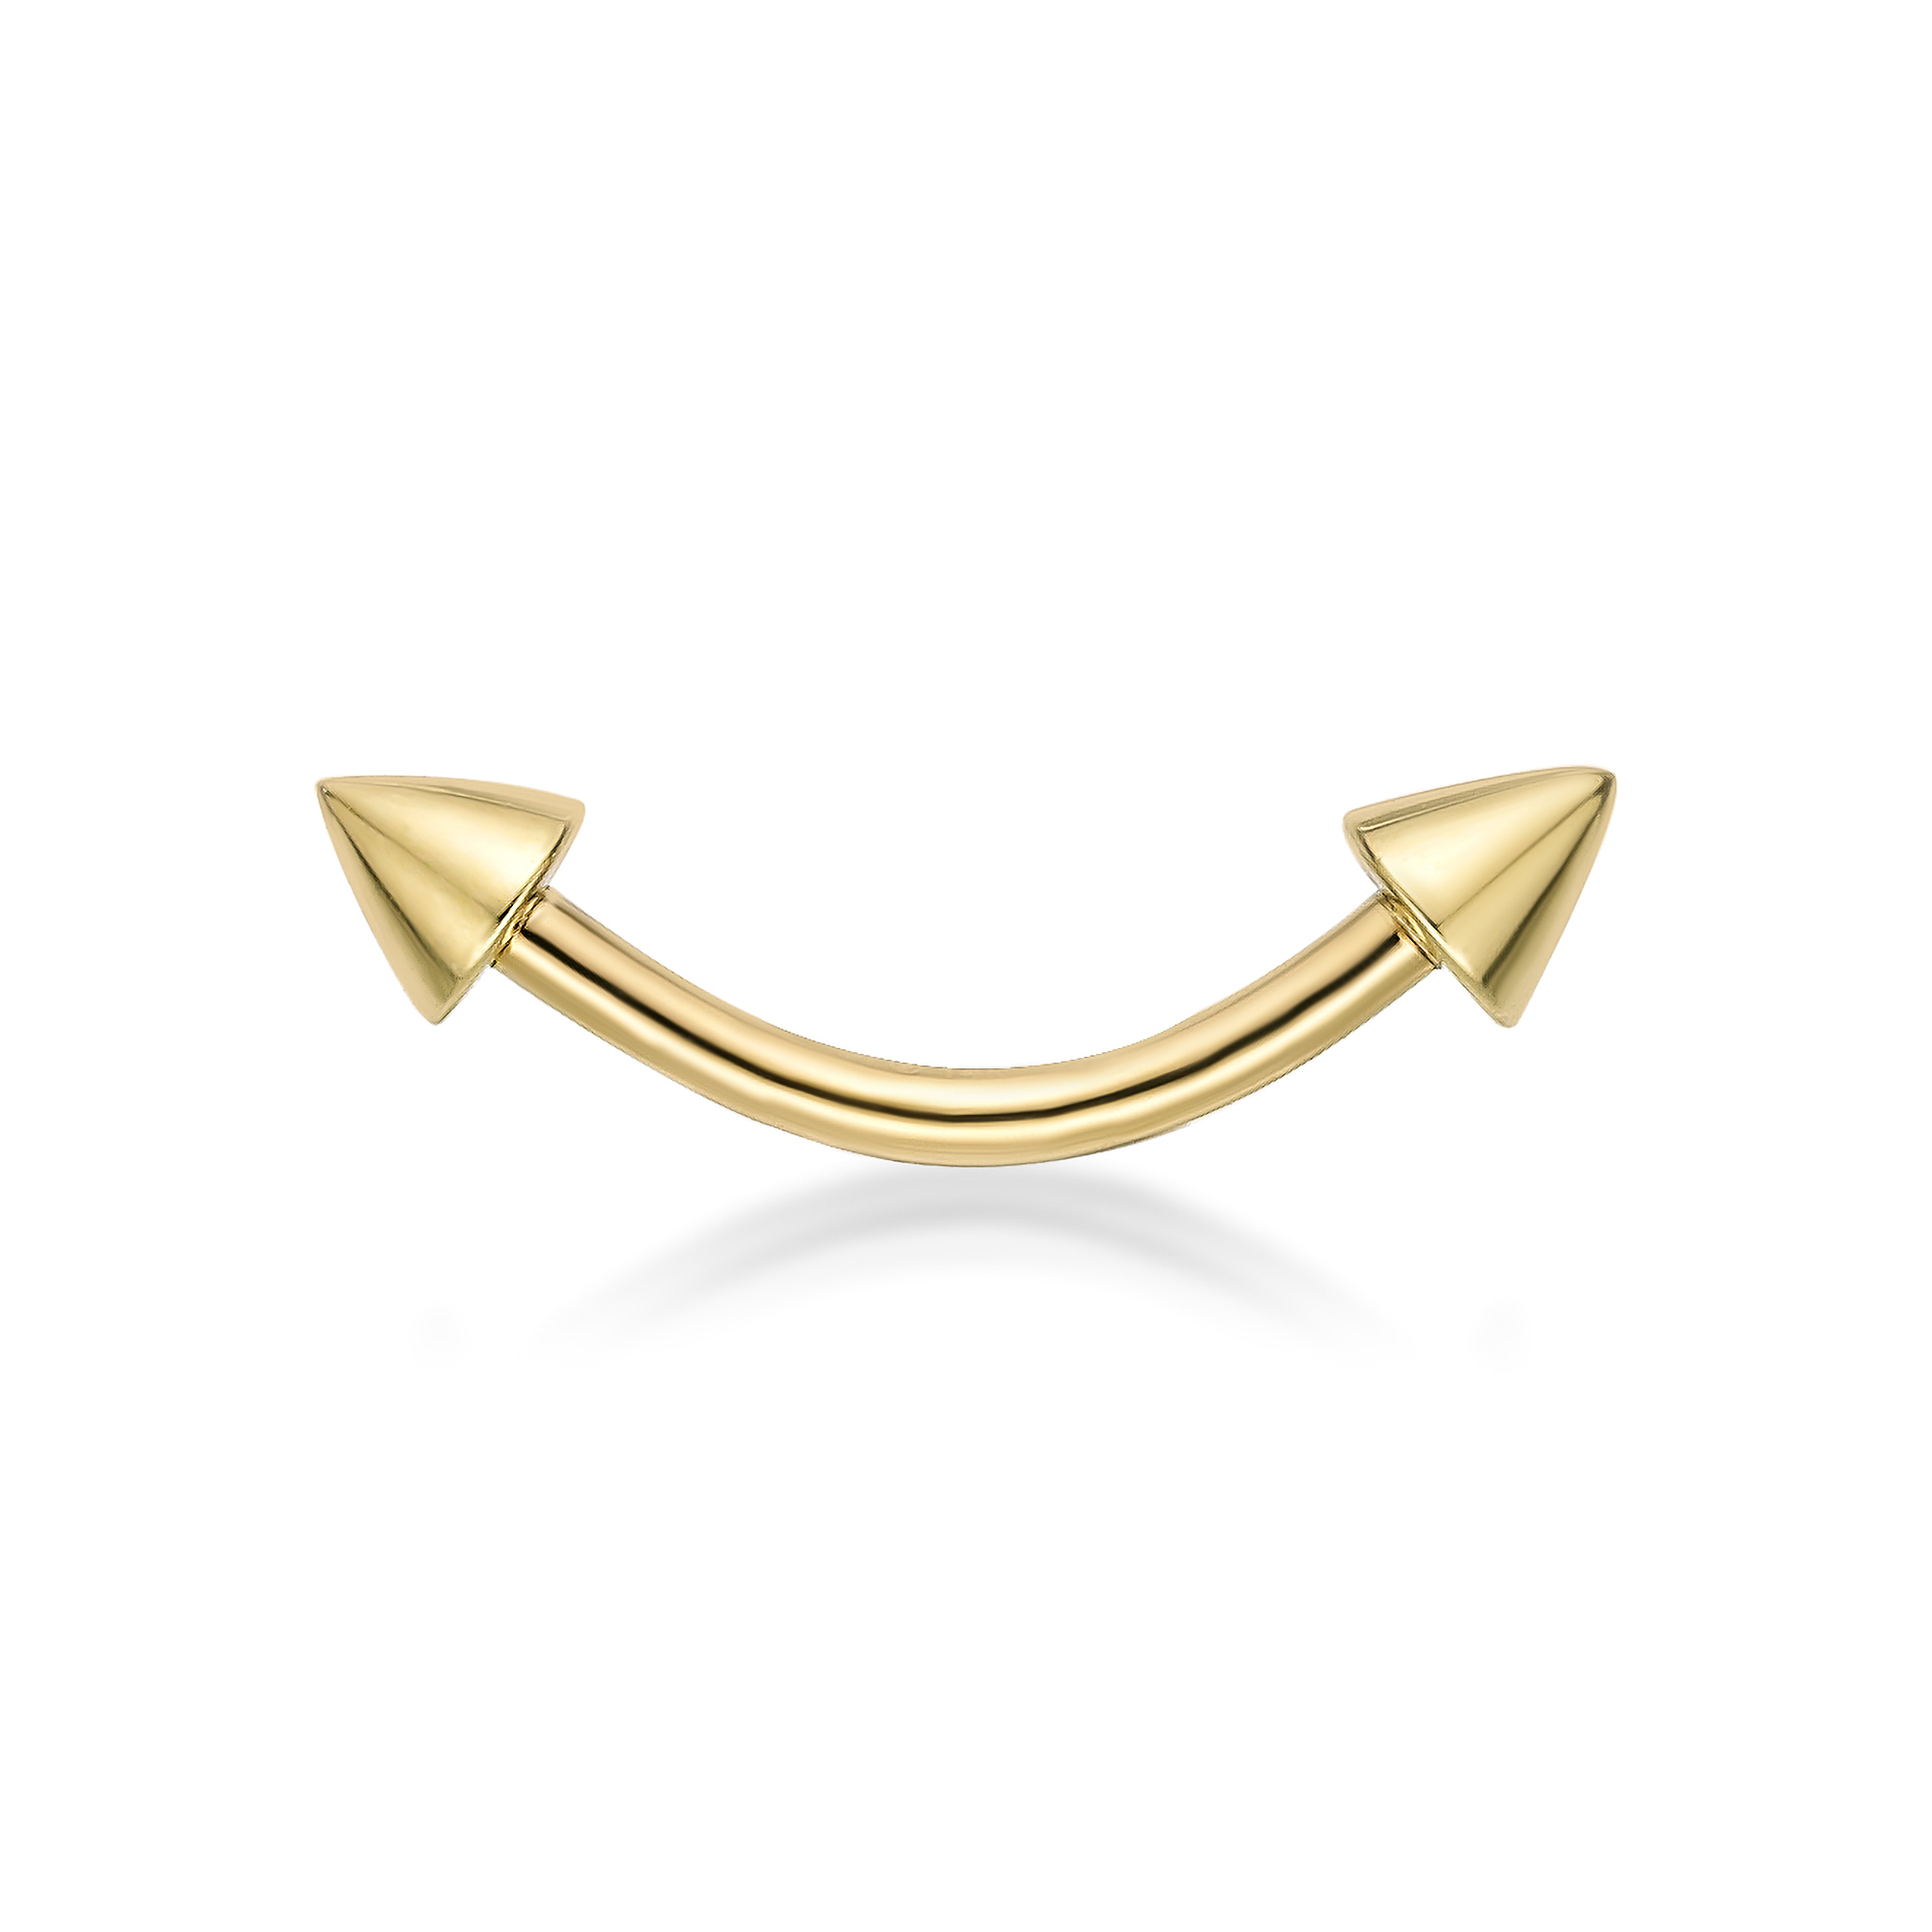 Women's 16 Gauge 14K Yellow Gold Curved Barbell Eyebrow Ring with Spikes, 3/8 | Lavari Jewelers